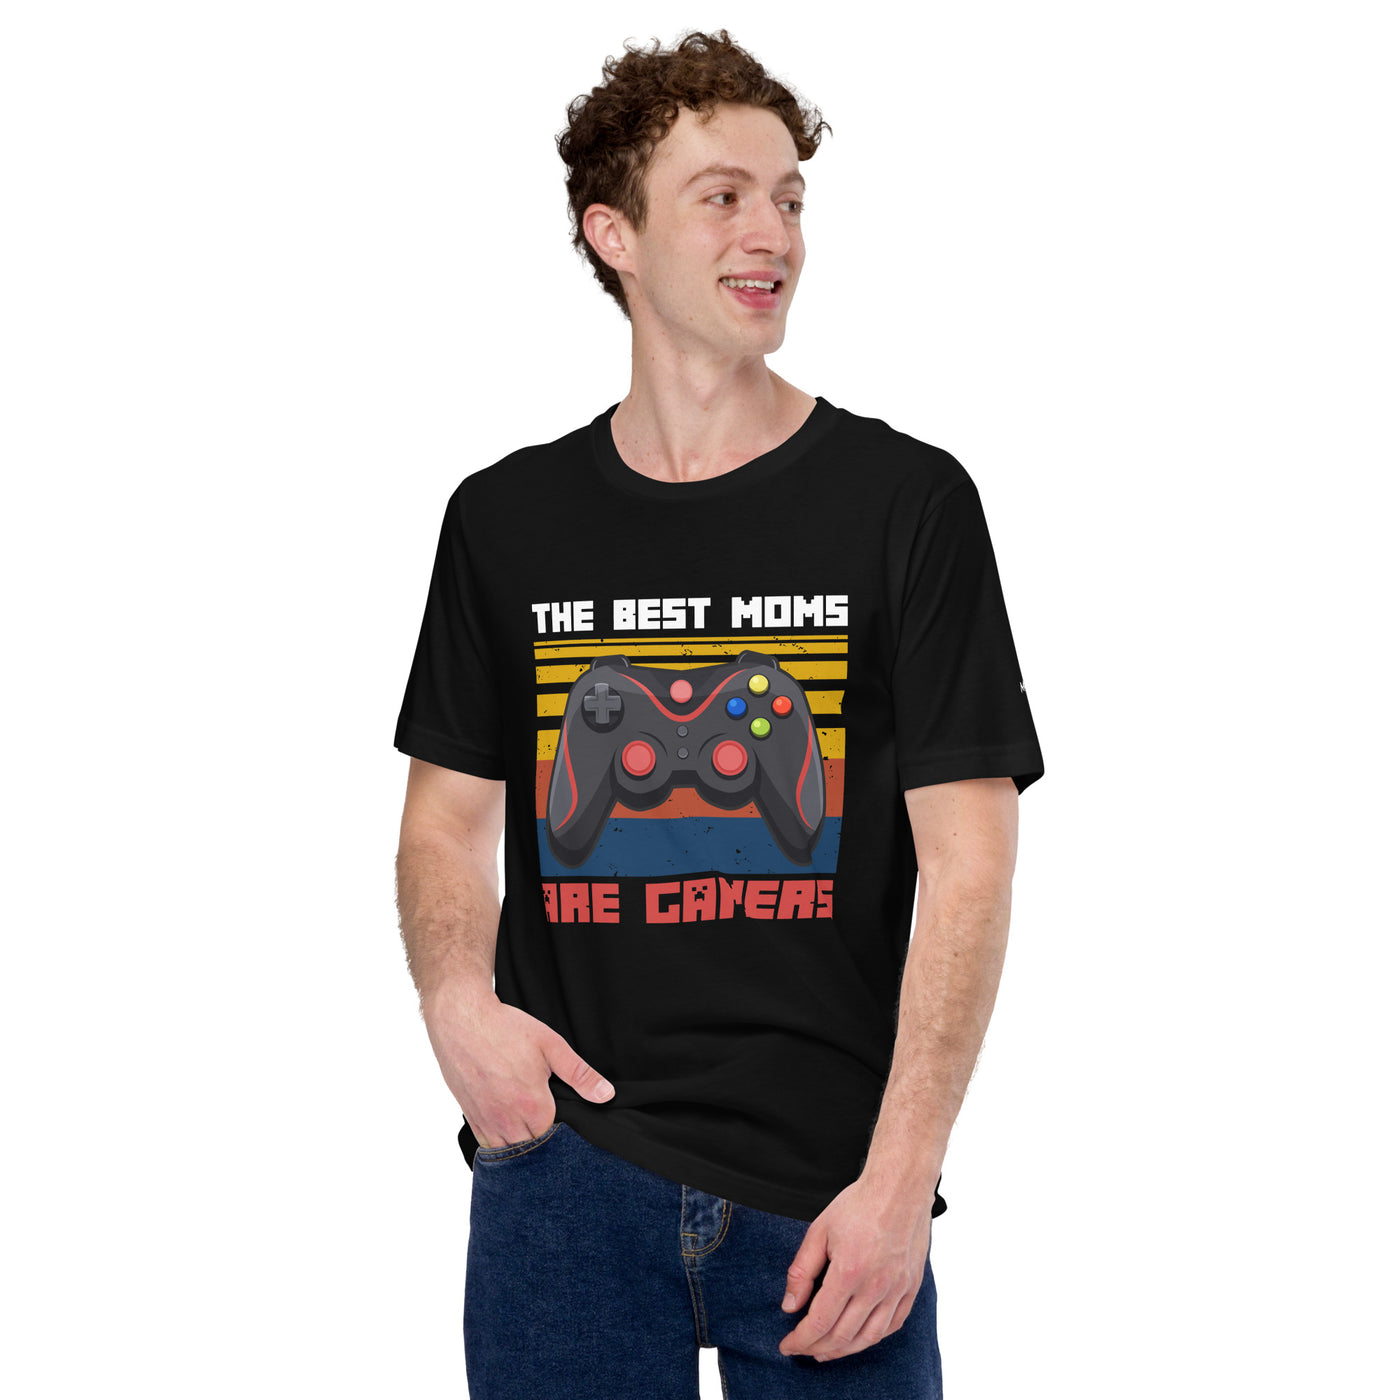 The best Moms are Gamers Unisex t-shirt